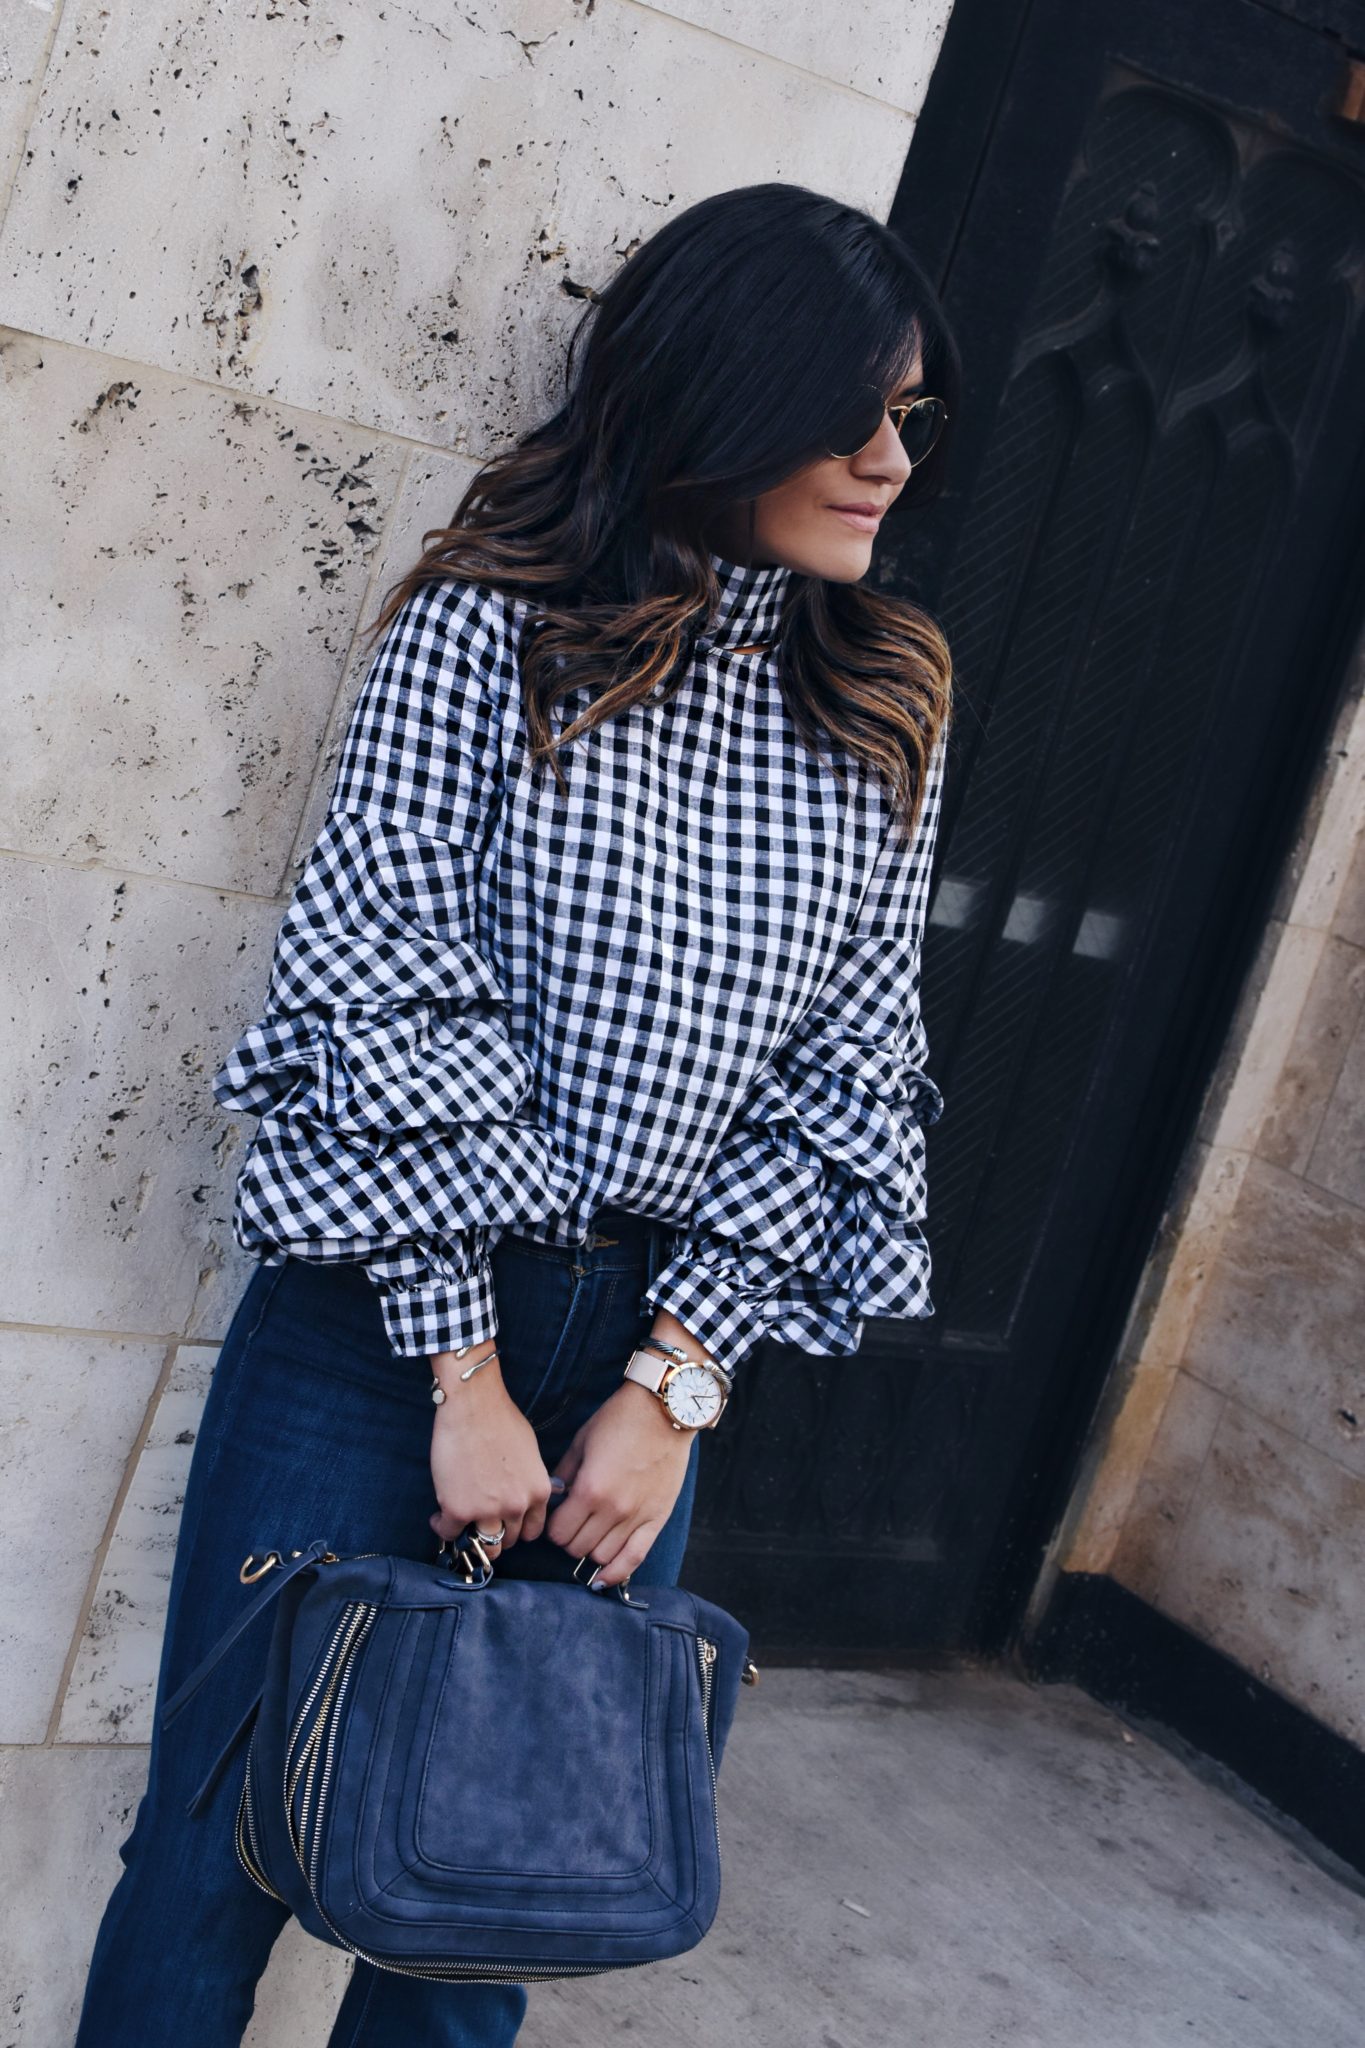 Carolina Hellal of Chic Talk wearing a Gingham top via Shein, Rayban rounded sunglasses, Levi's flare jeans and a Violet Ray suede bag